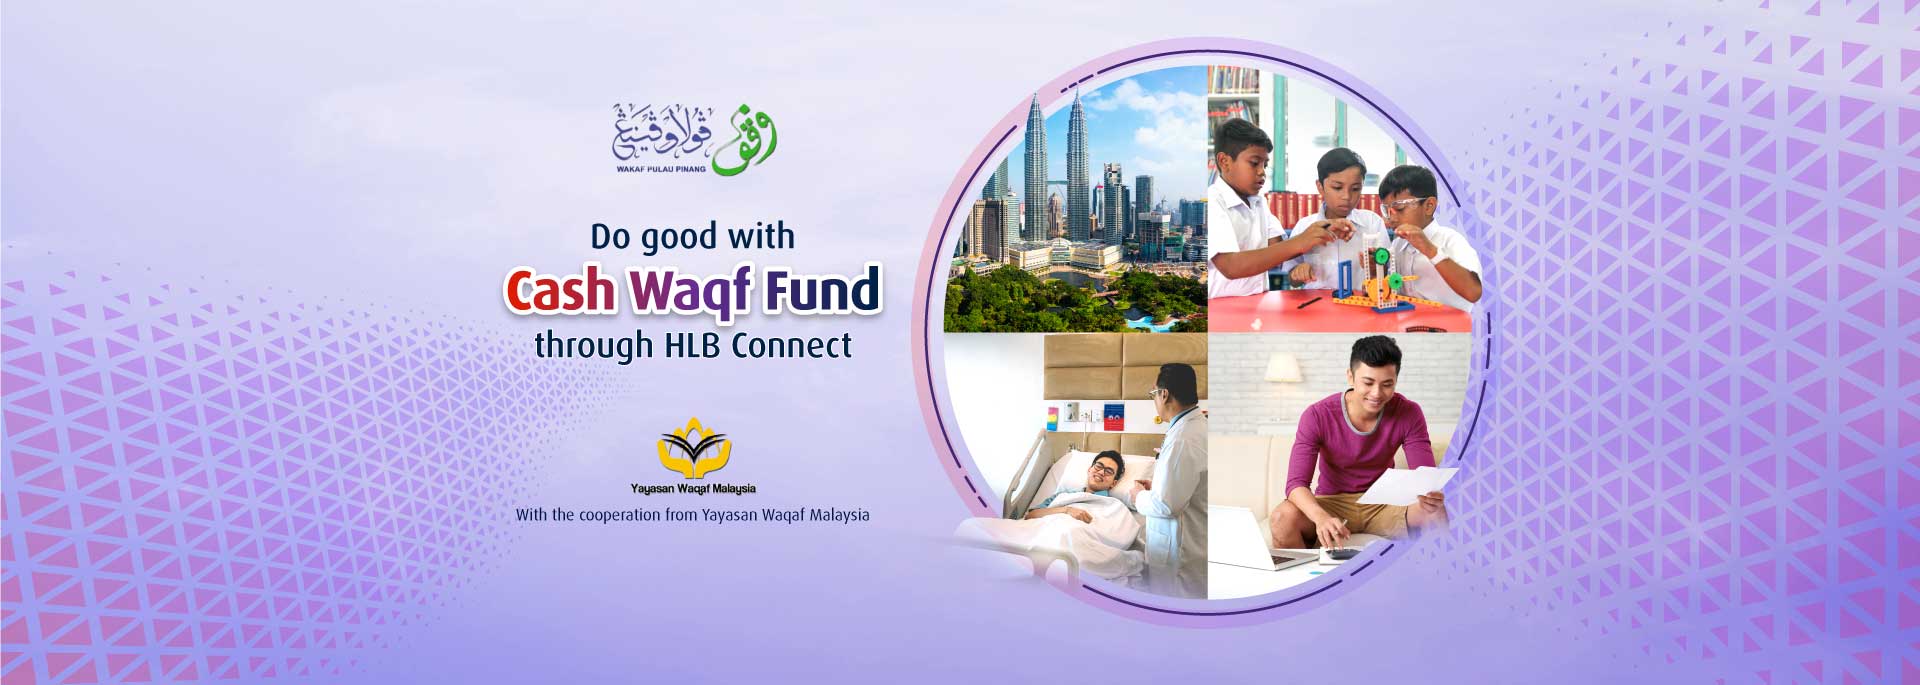 Do good with Cash Waqf Fund through HLB Connect